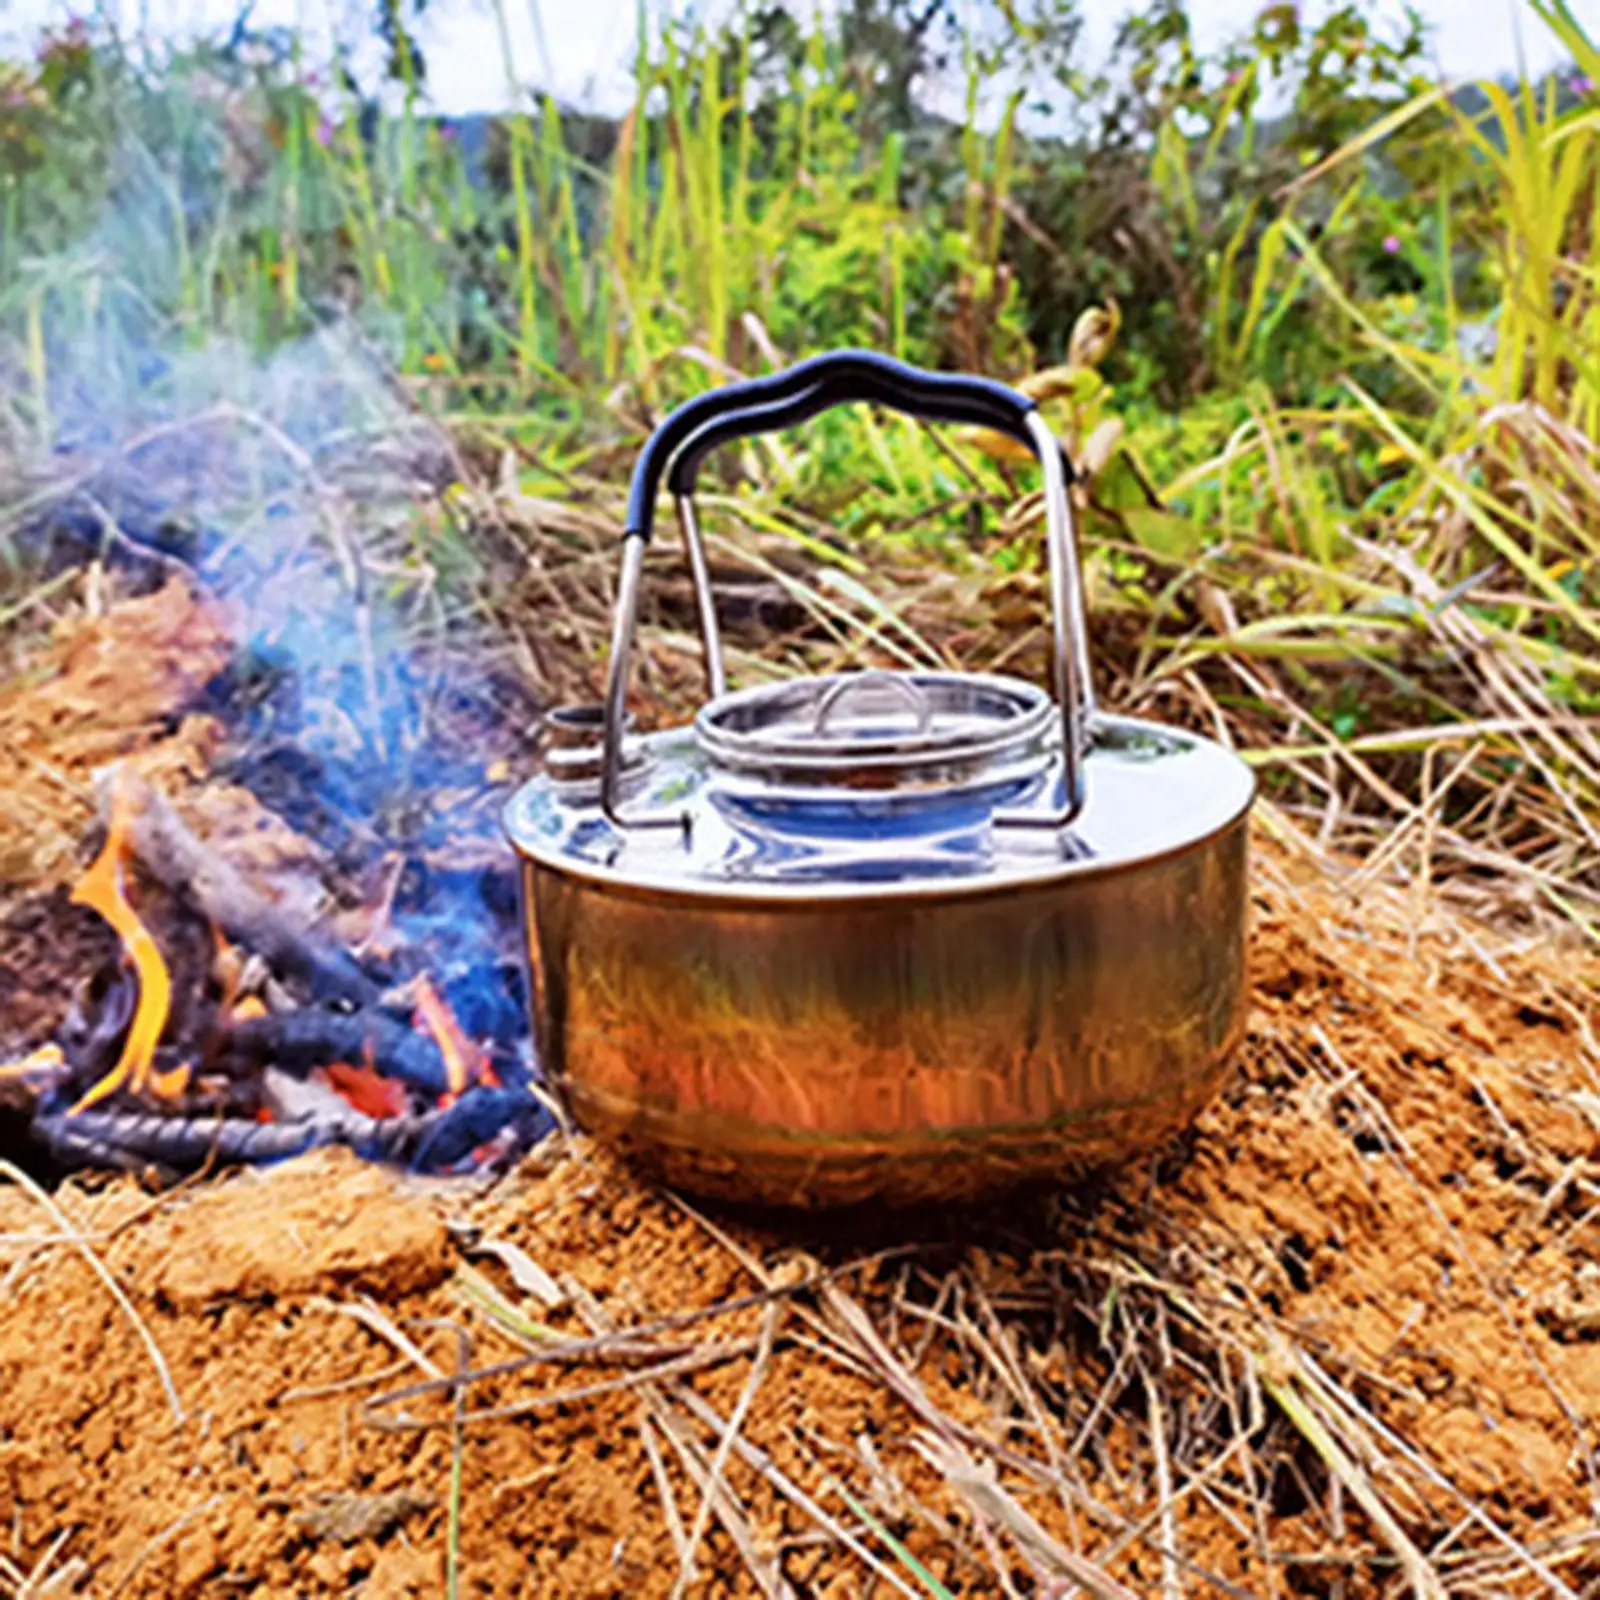 Portable Camping Tea Kettle Teapot Campfire Kettle Cookware Outdoor Kettle for Camping Backpacking Kitchen Picnic Hiking